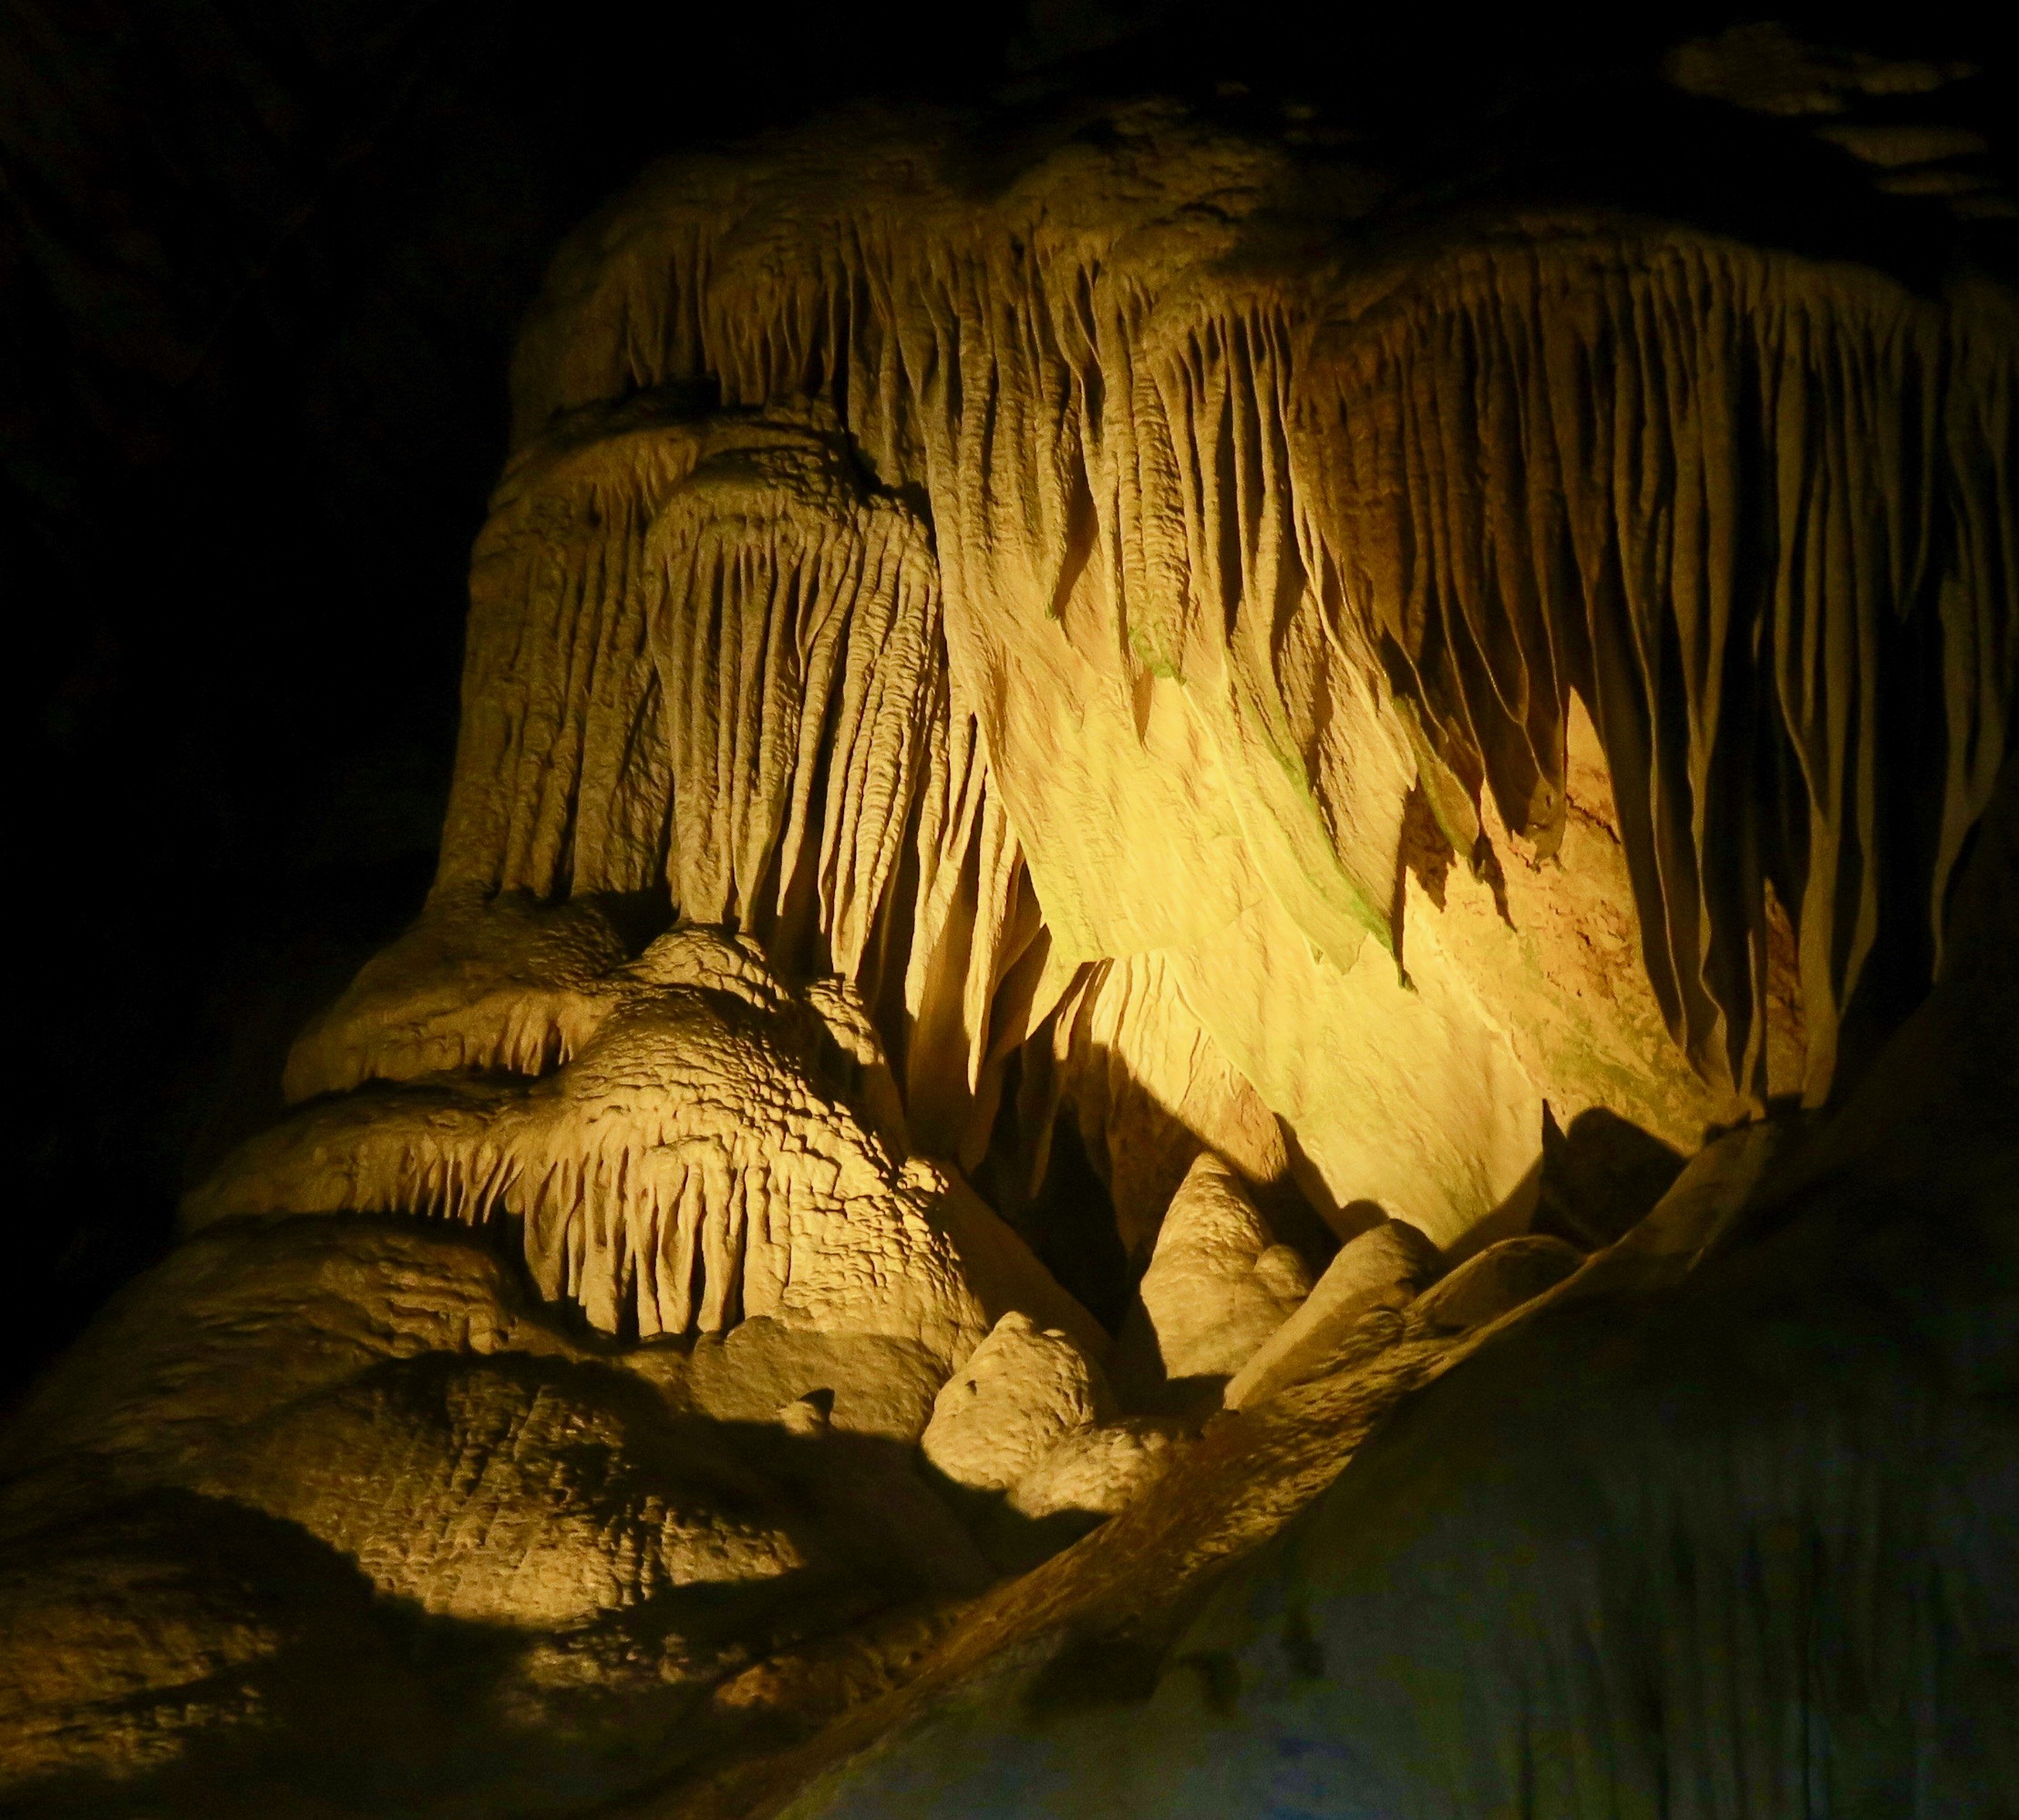 The Whale's Mouth, Carlsbad Caverns